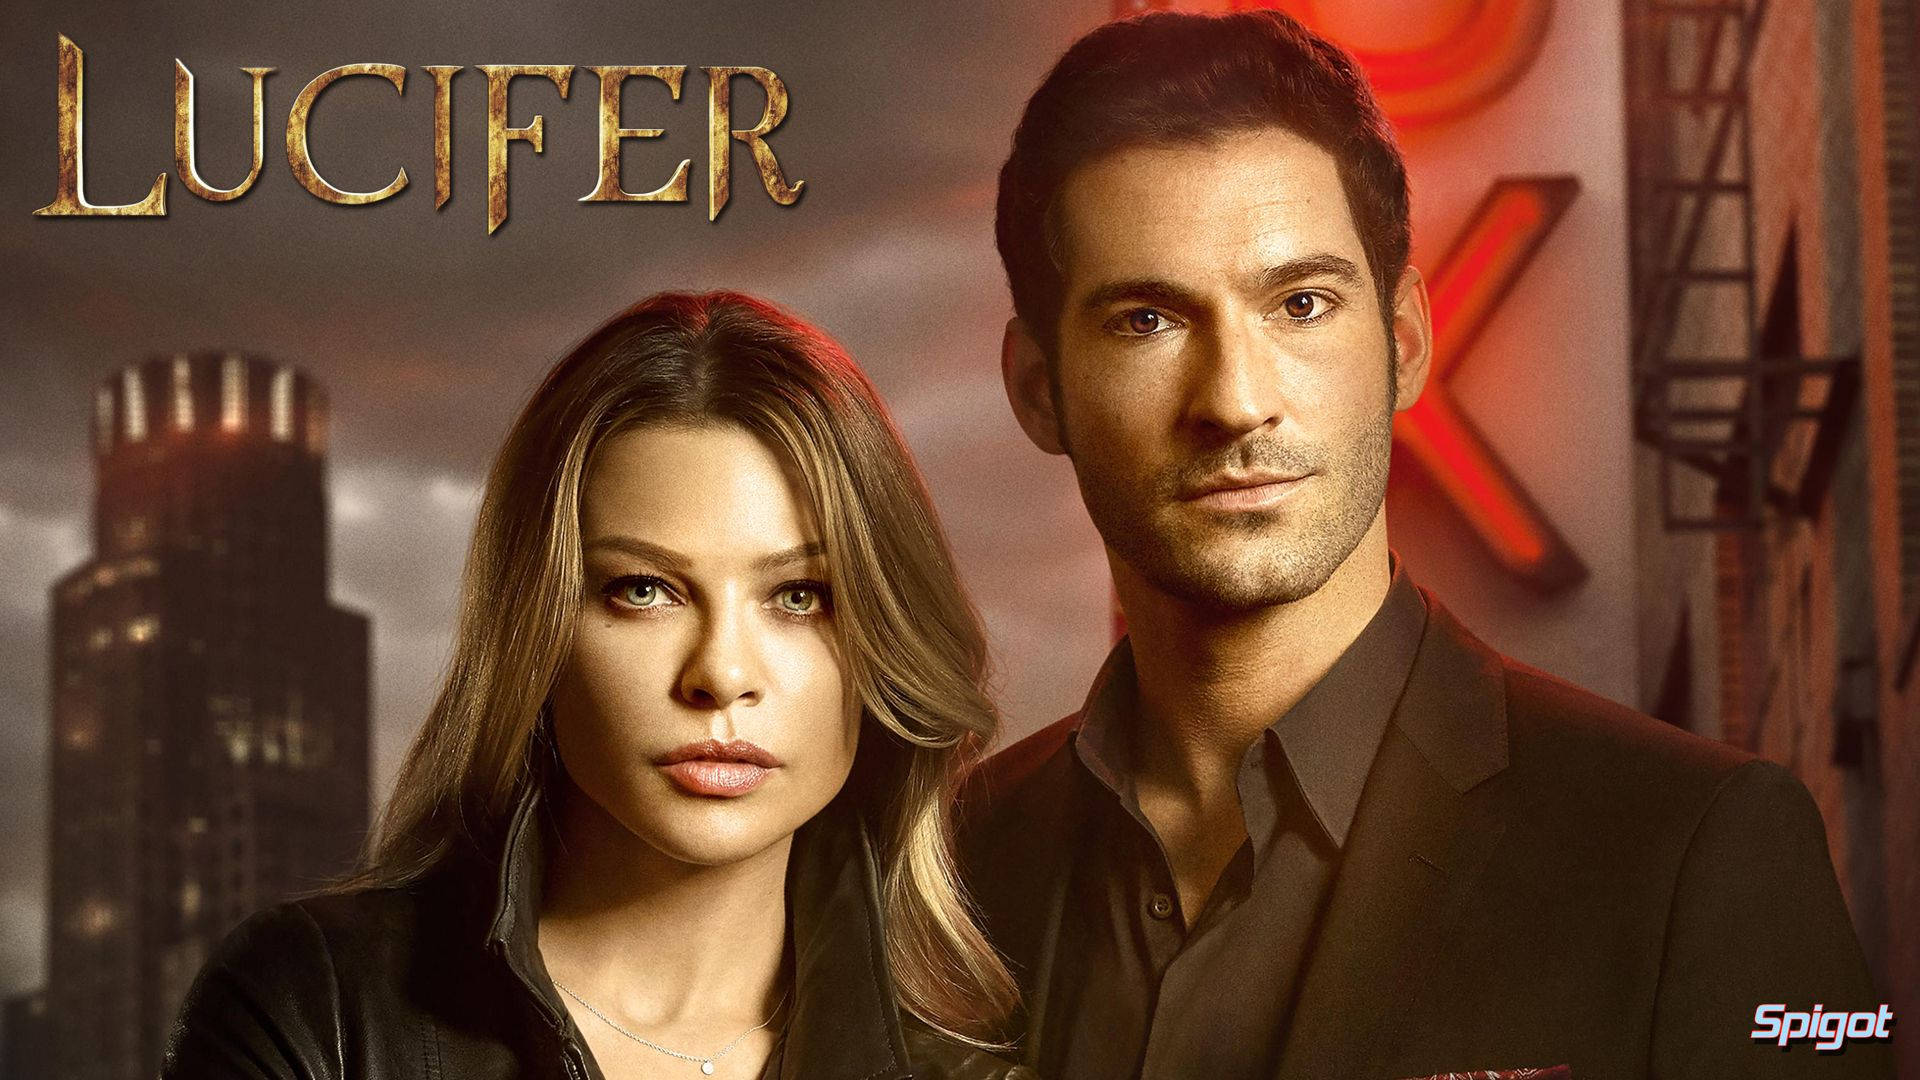 Lucifer And Chloe Hd Poster Wallpaper